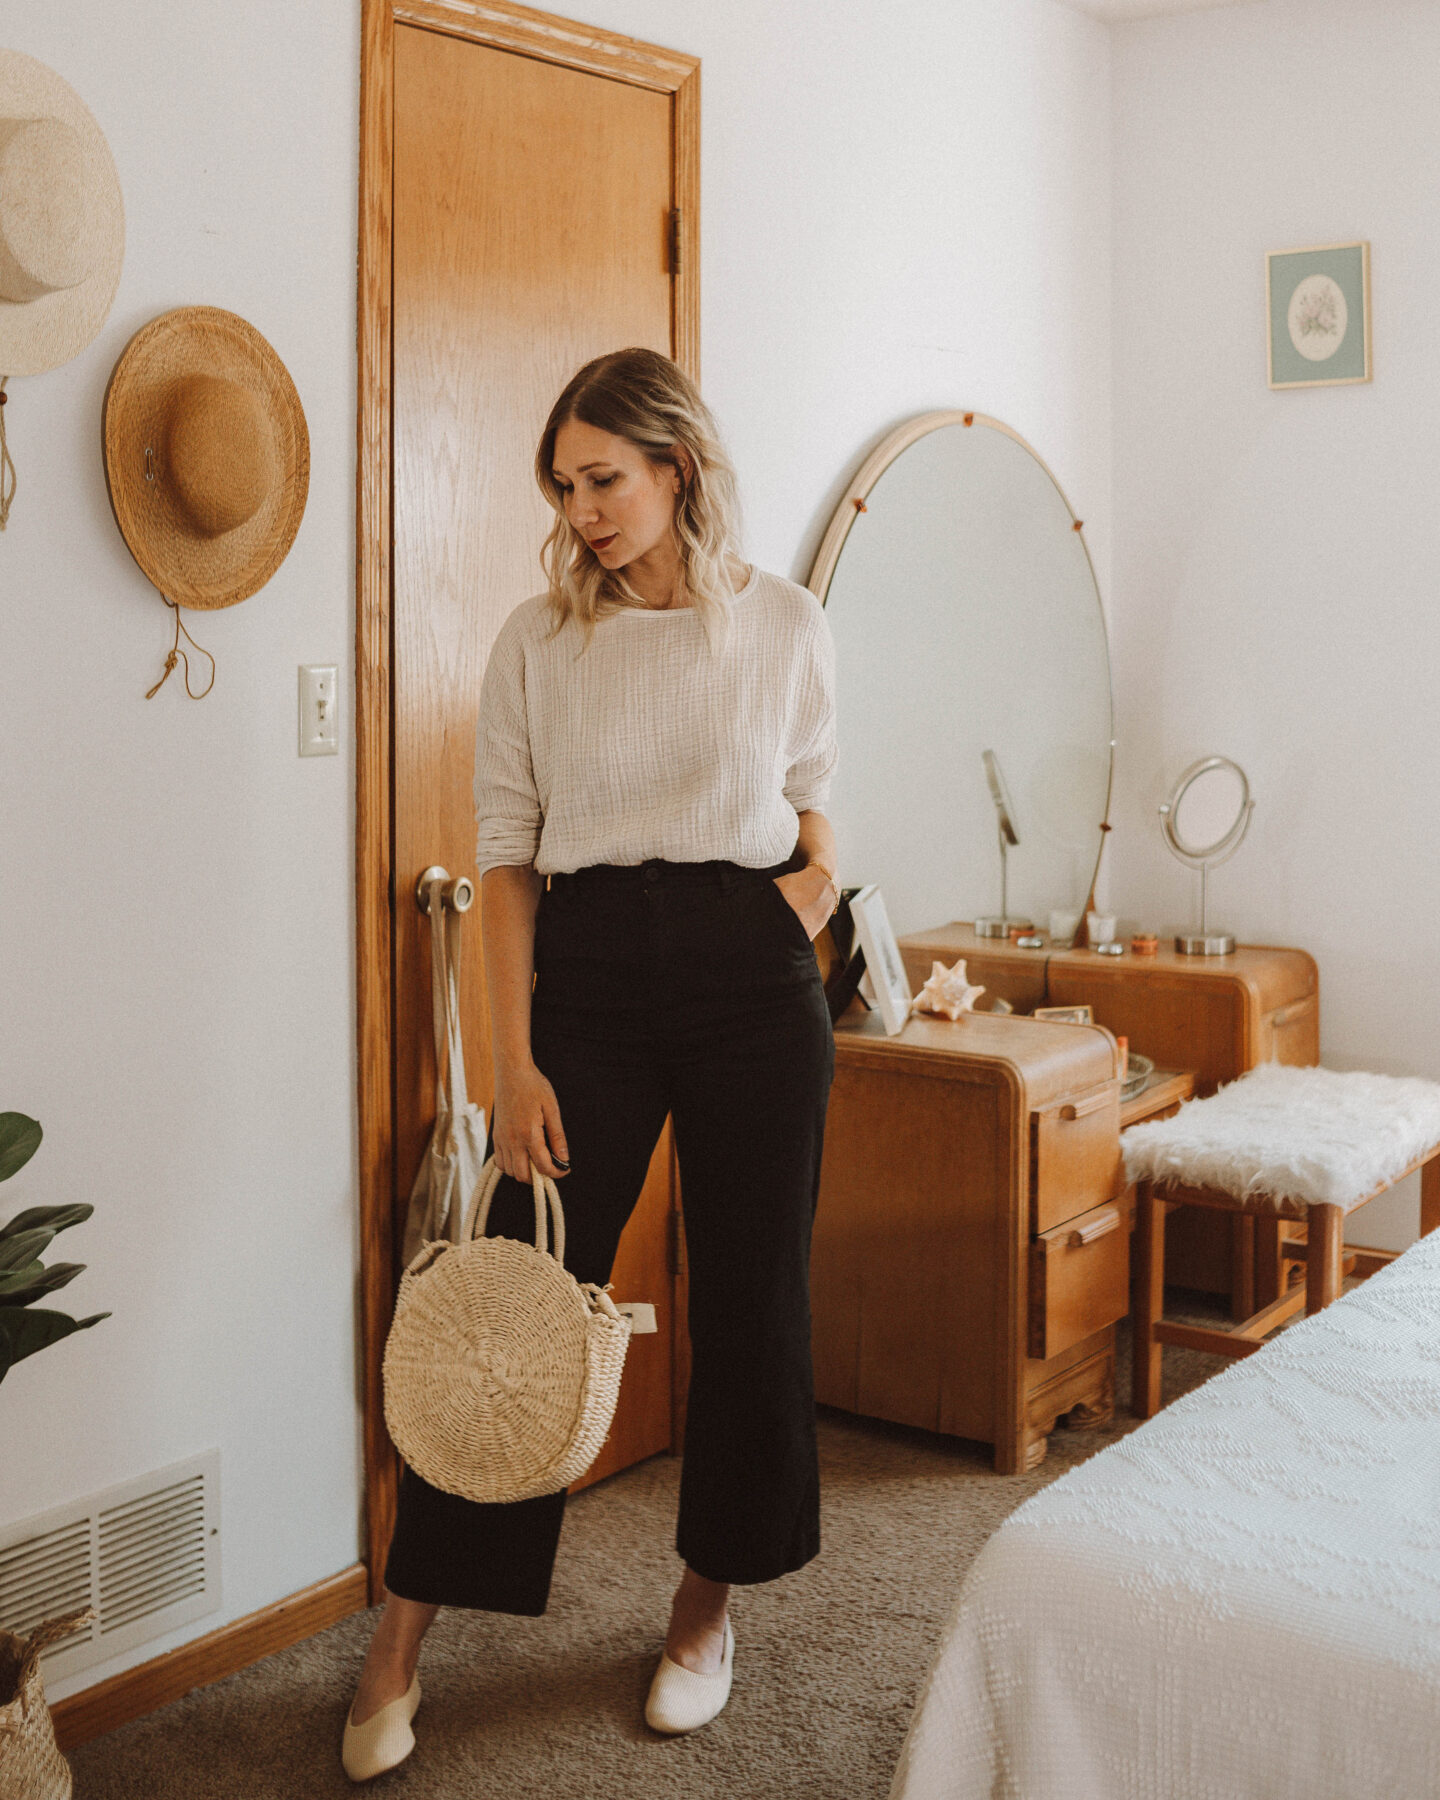 How to Style Wide Leg Pants + 6 Outfit Ideas, it is well la gauze long sleeve top, black kotn cropped culotte pants, everlane reknit day glove shoe, straw circle bag